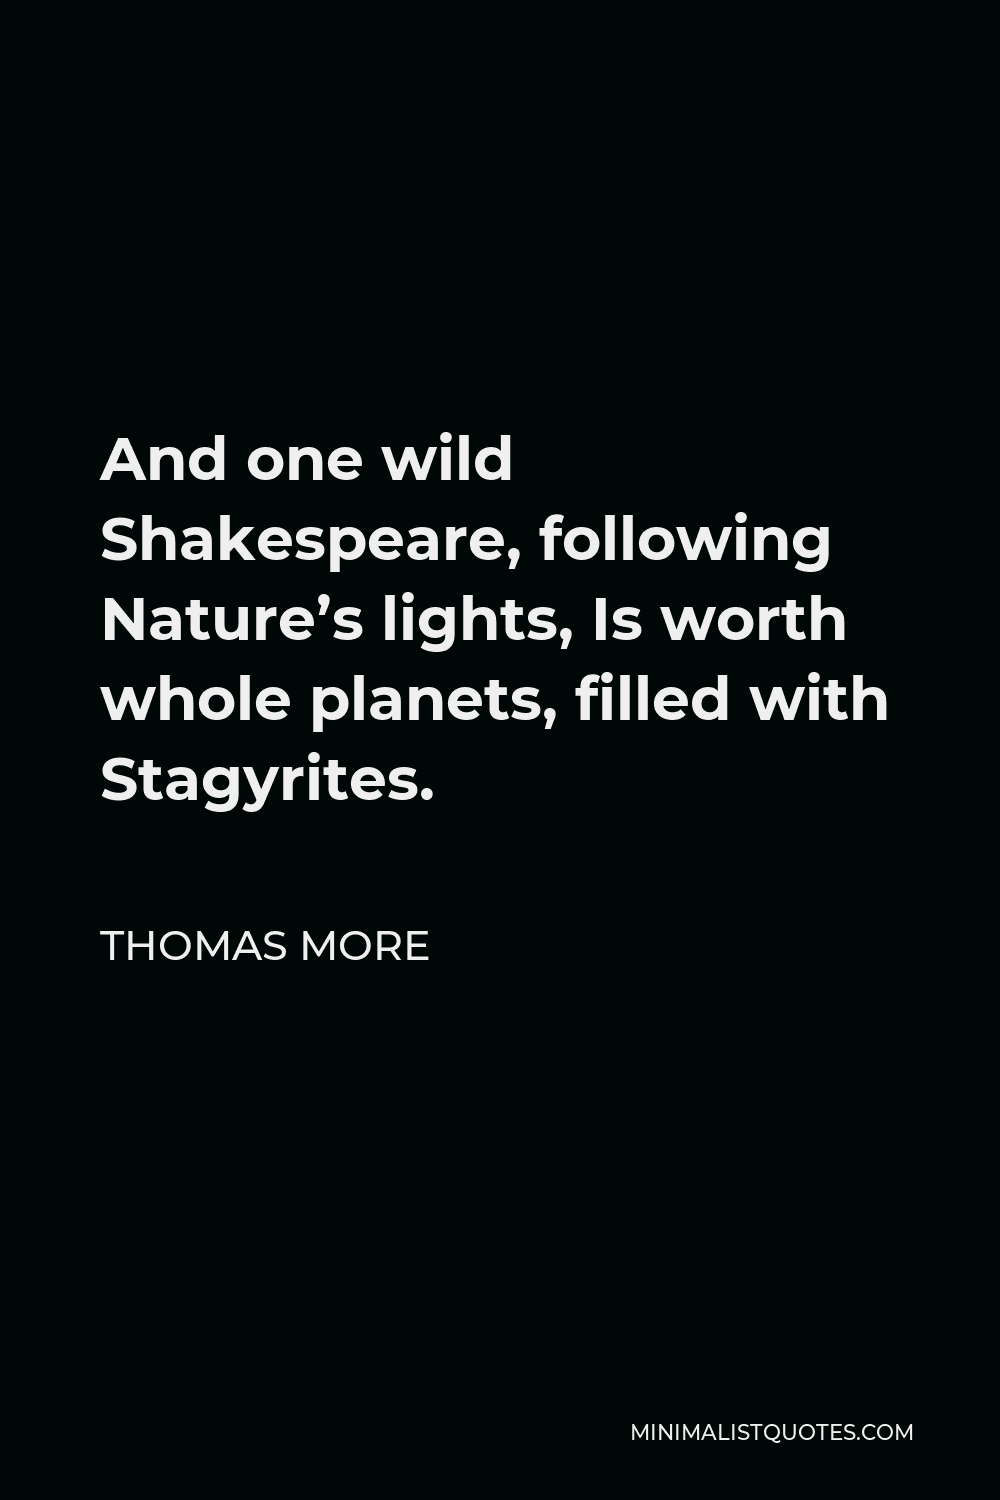 Thomas More Quote - And one wild Shakespeare, following Nature’s lights, Is worth whole planets, filled with Stagyrites.